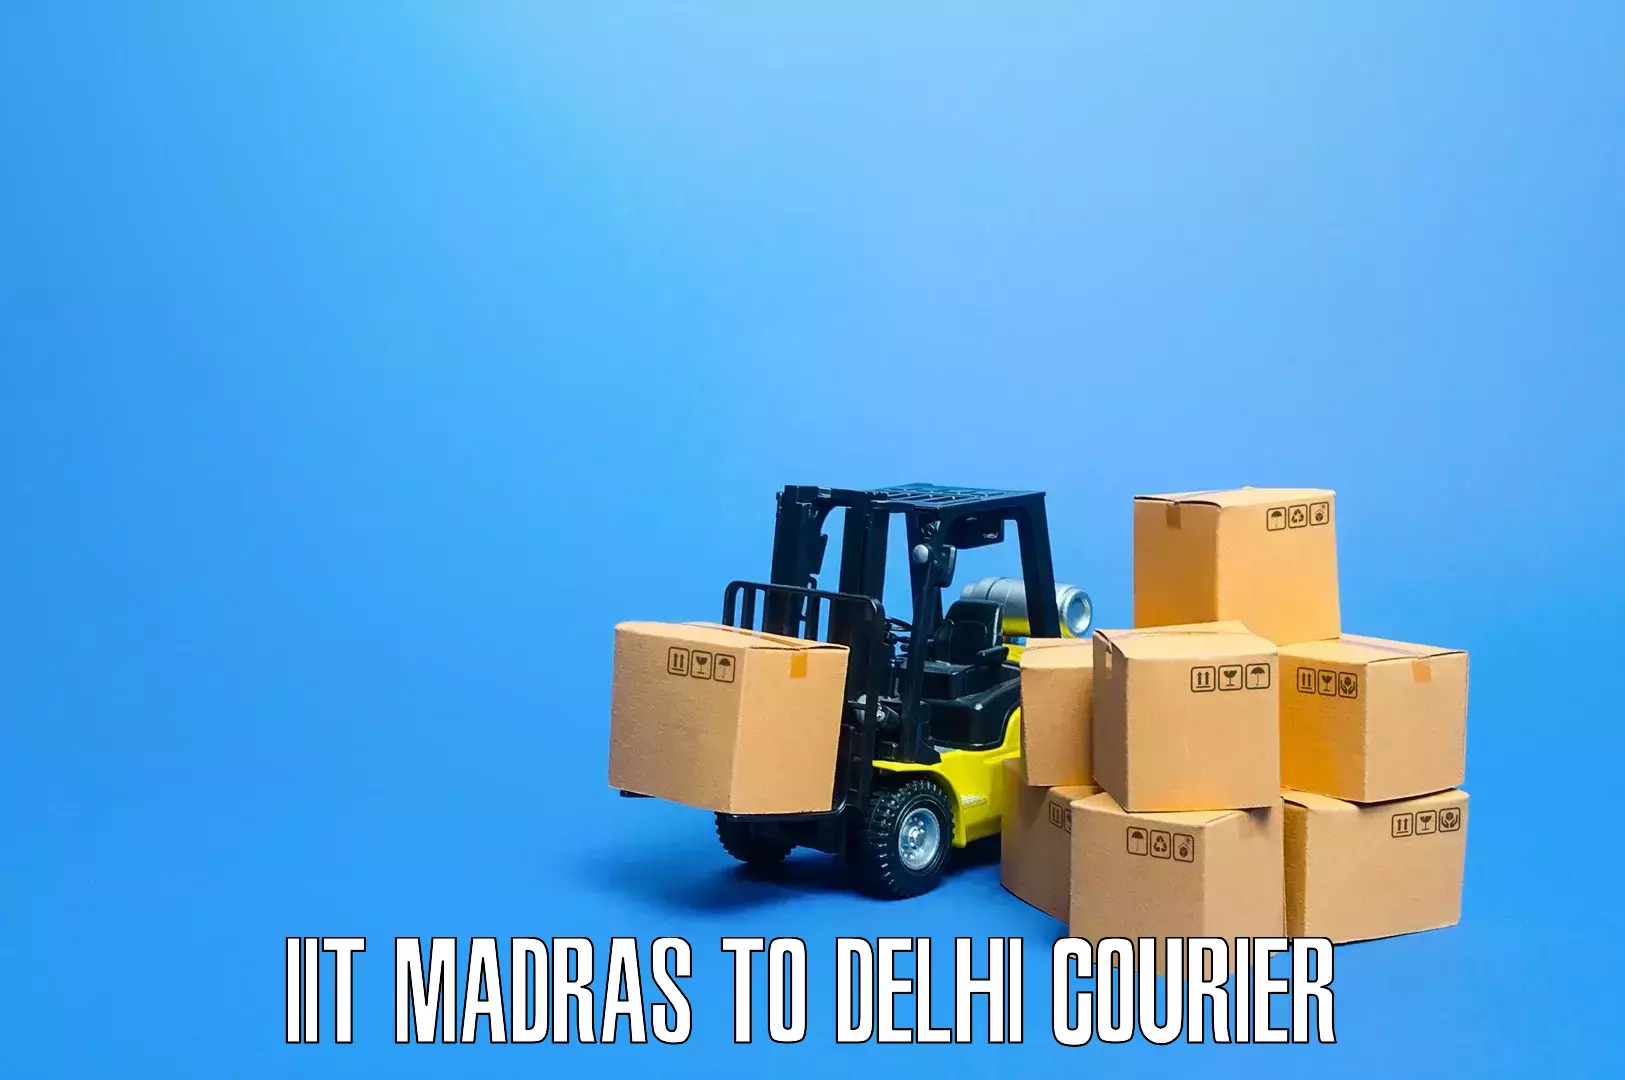 Home furniture moving IIT Madras to University of Delhi